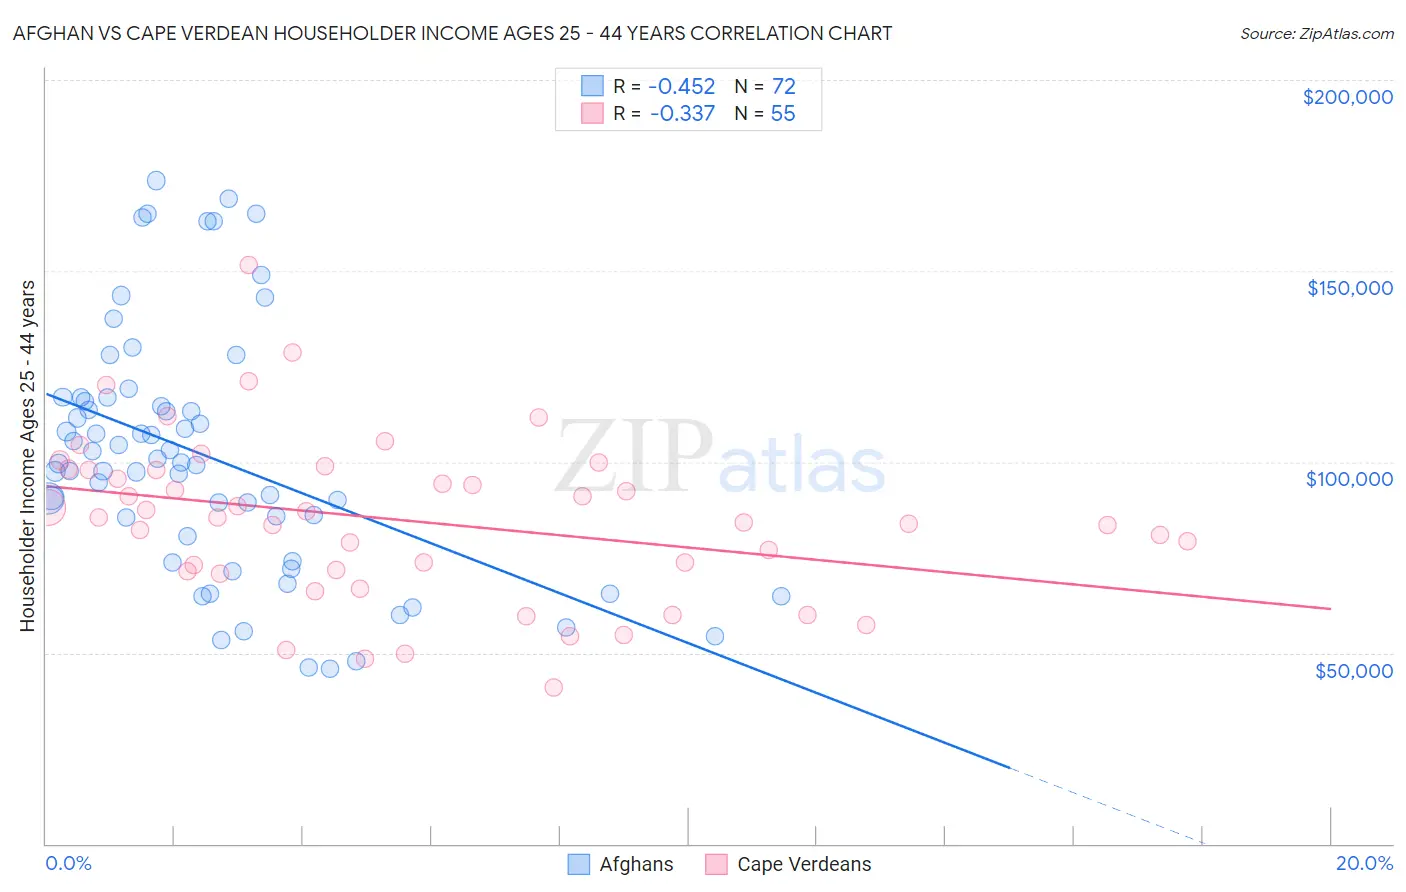 Afghan vs Cape Verdean Householder Income Ages 25 - 44 years